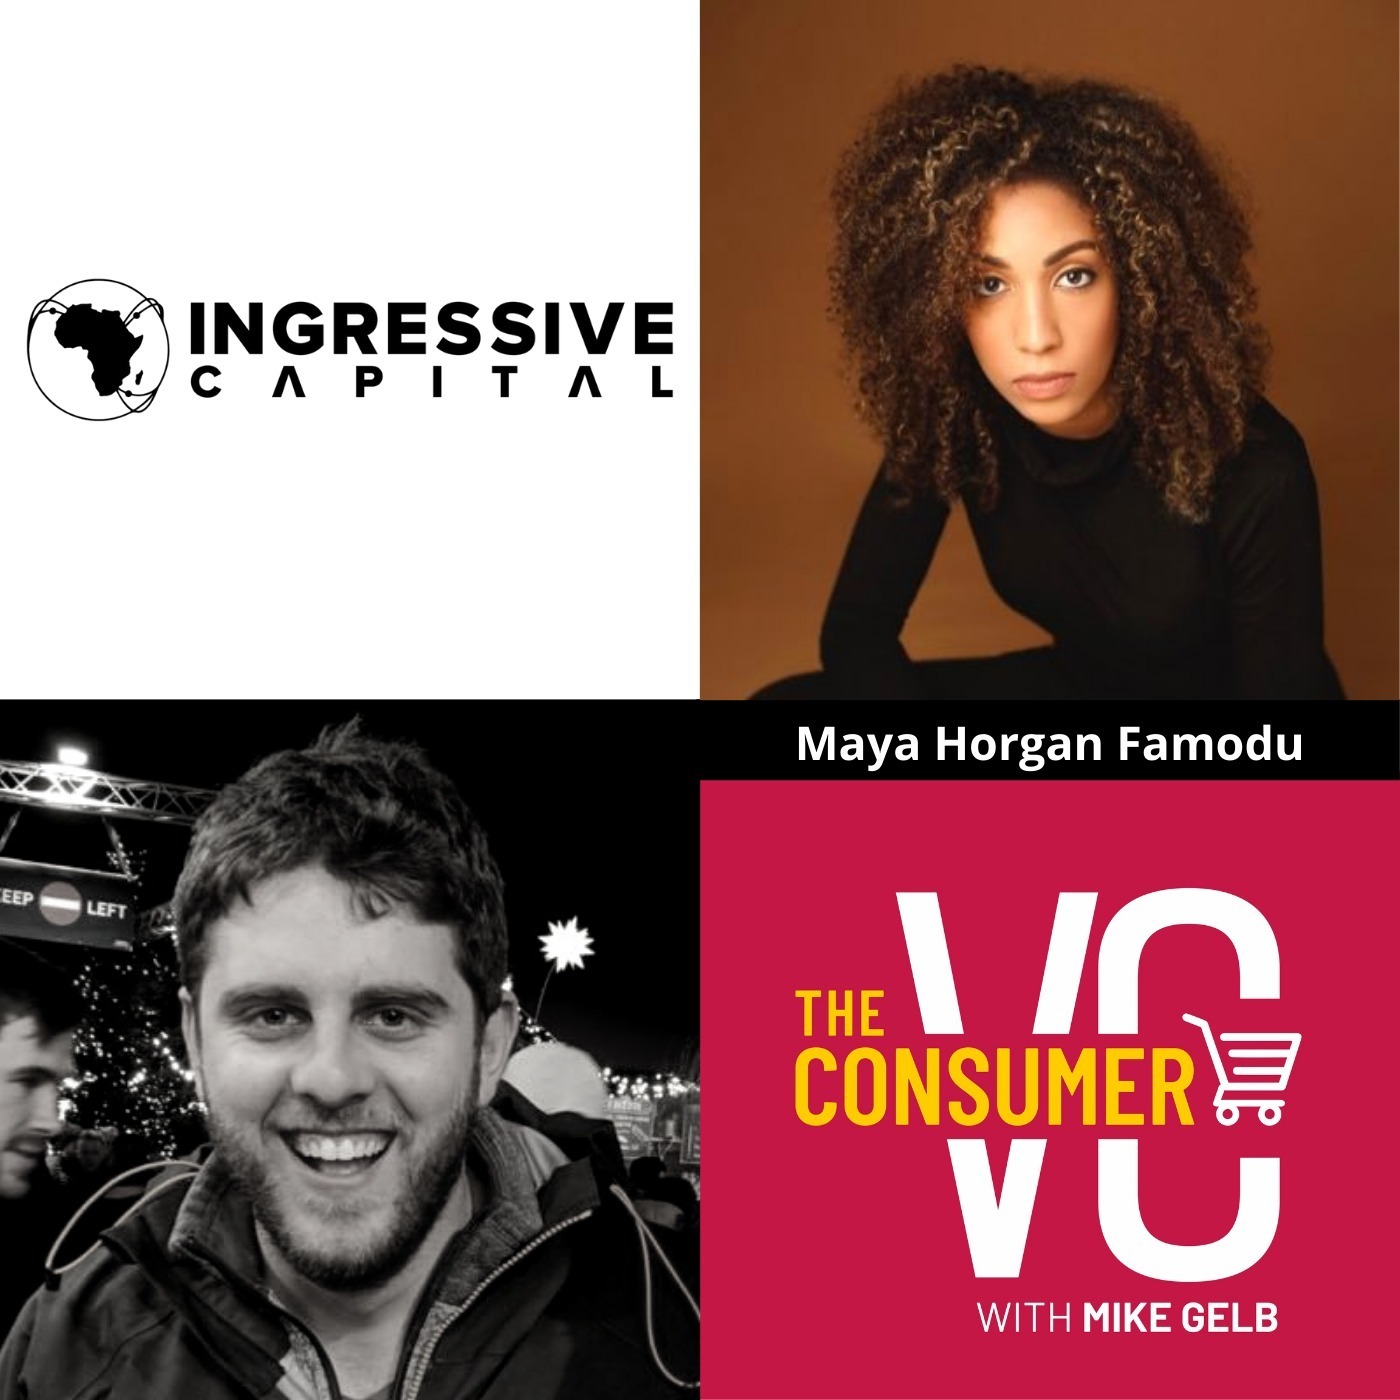 Maya Horgan Famodu (Ingressive Capital) - Investing in Sub-Saharan Africa, What She Looks For When Entering New Countries, How to Build Startup Ecosystems in Frontier Markets